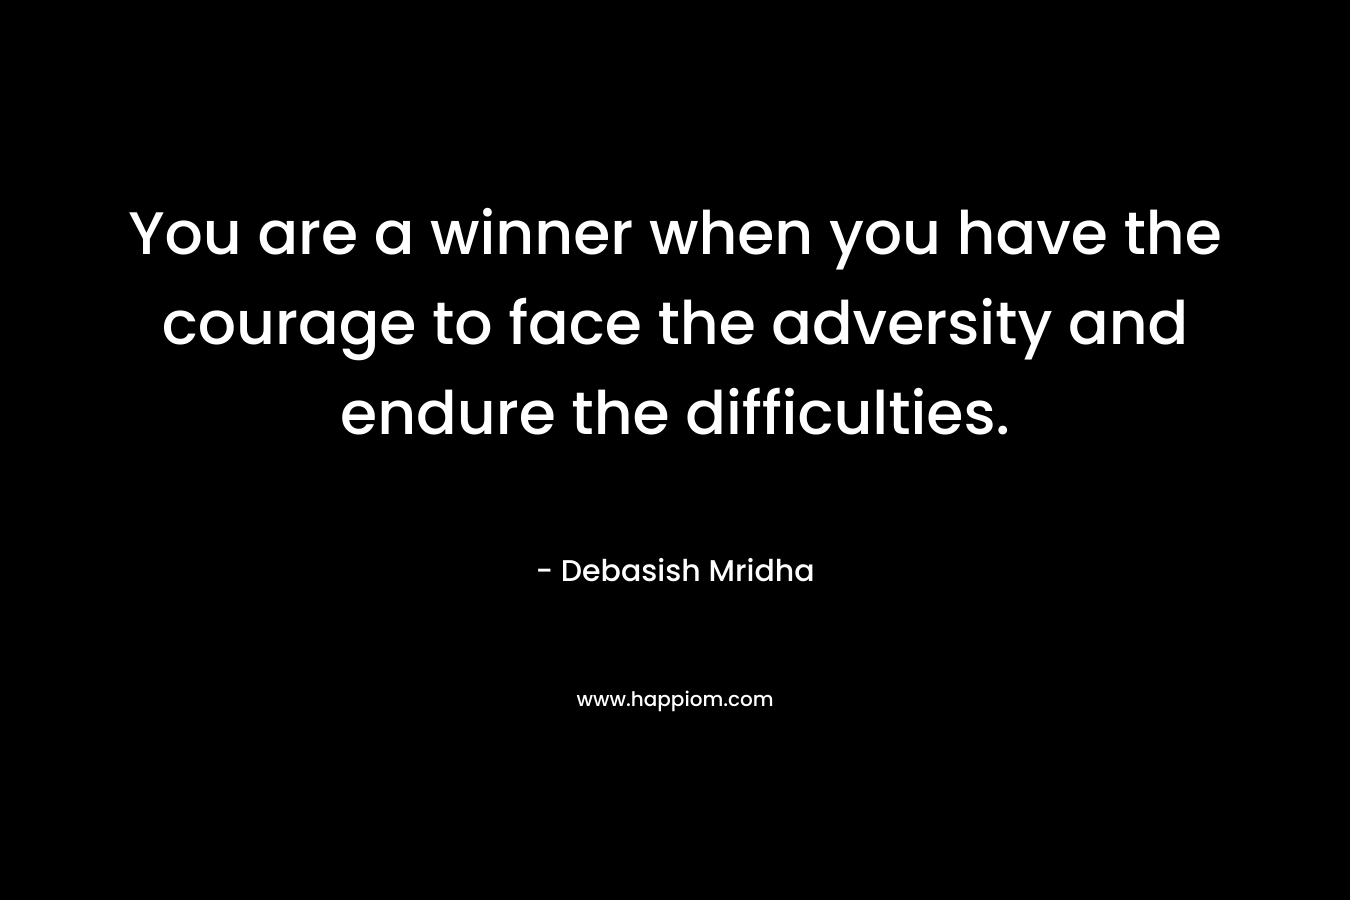 You are a winner when you have the courage to face the adversity and endure the difficulties.